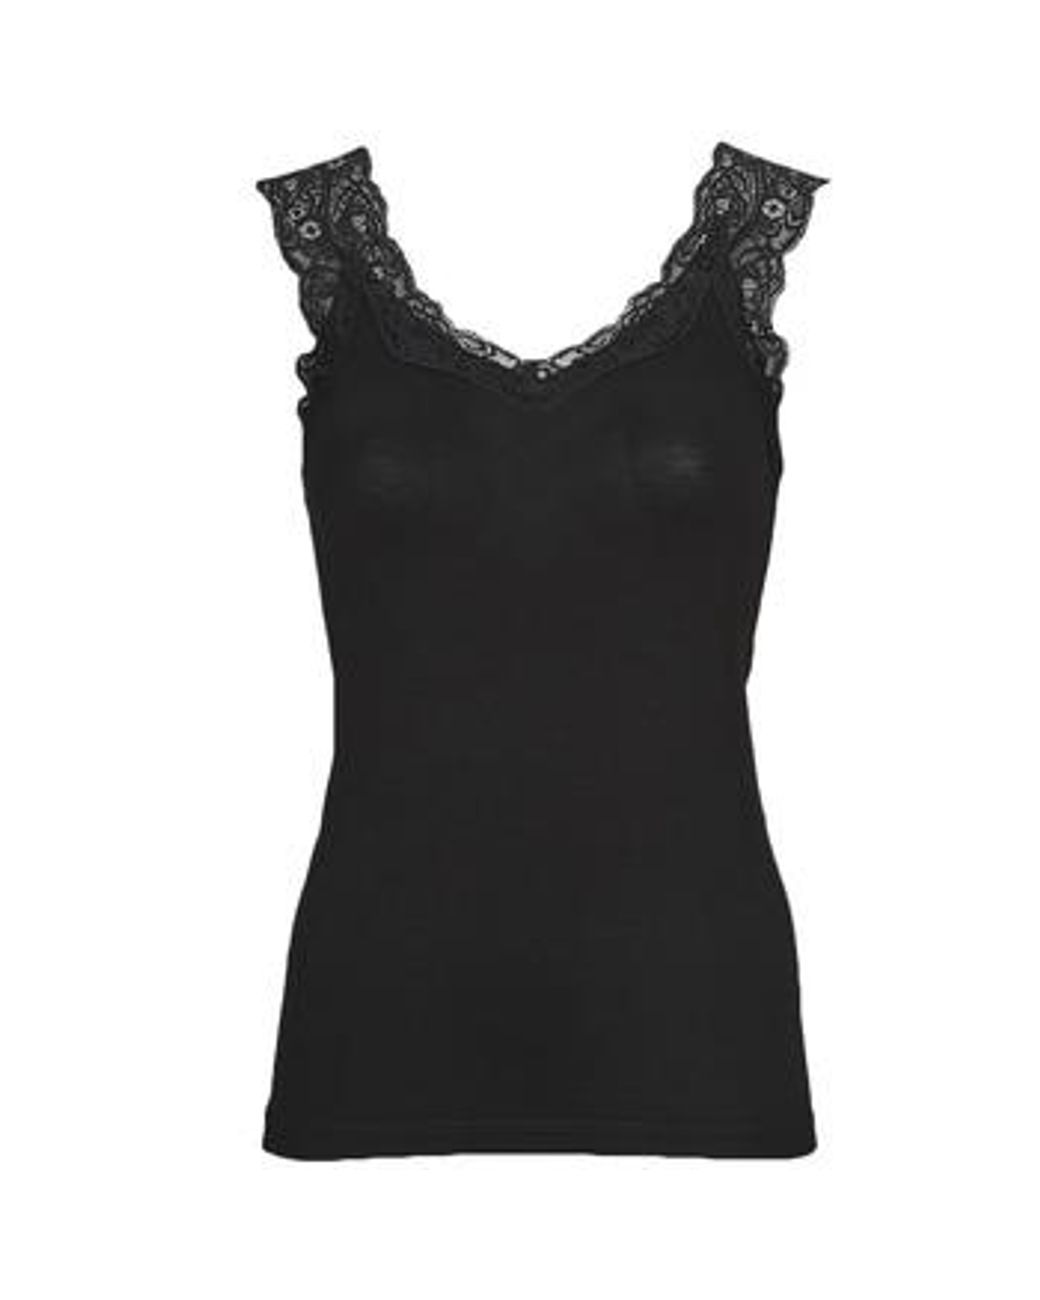 Lace Tops Sleeveless in Pcbarbera | Top UK Lyst Pieces / Black T-shirts